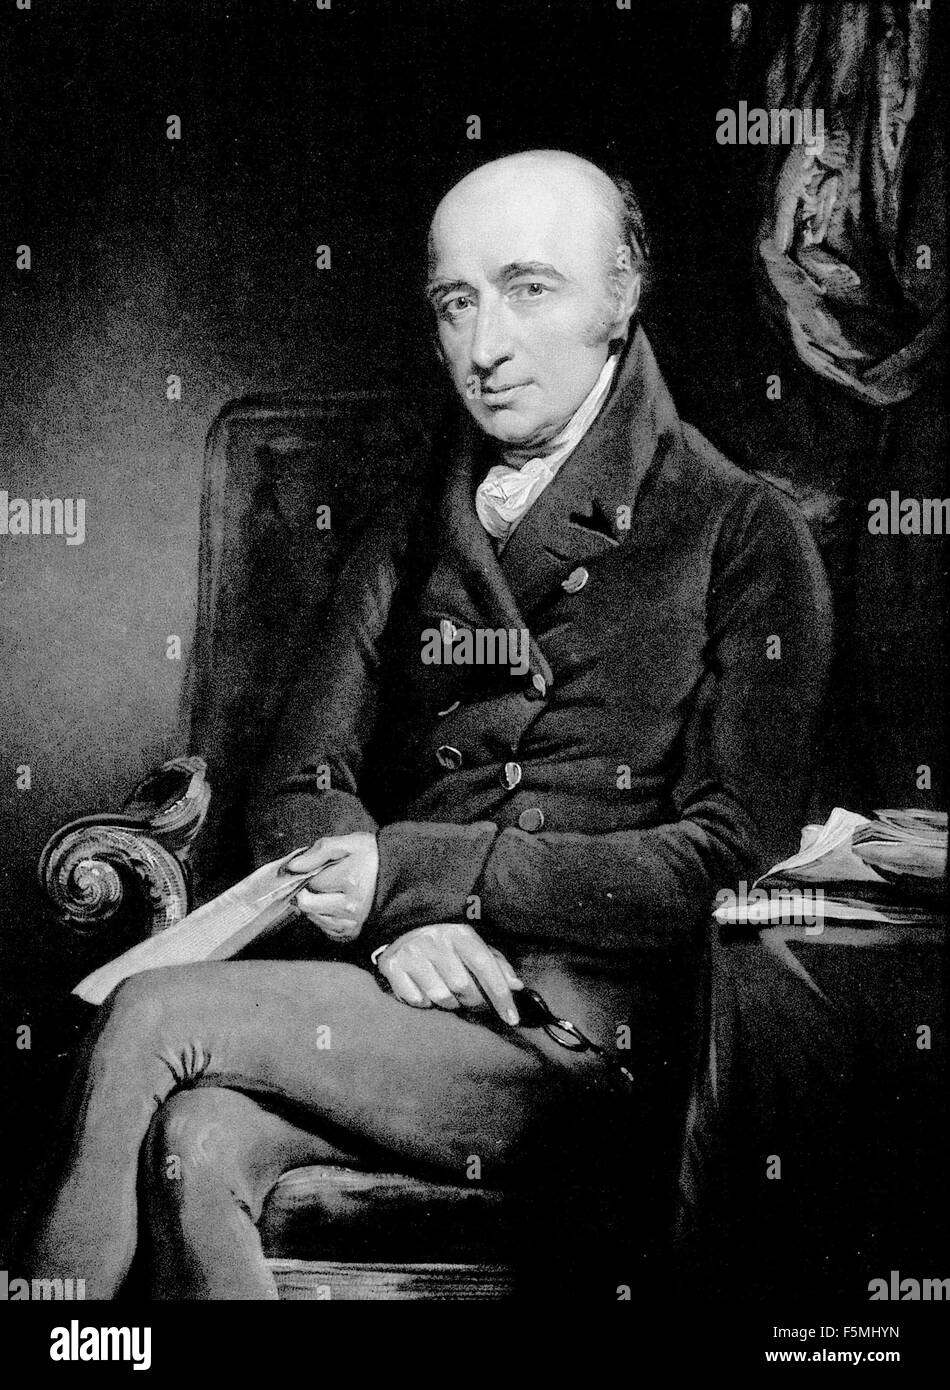 WILLIAM HYDE WOLLASTON (1766-1828) English chemist and physicist, engraving based on painting by John Jackson. Stock Photo